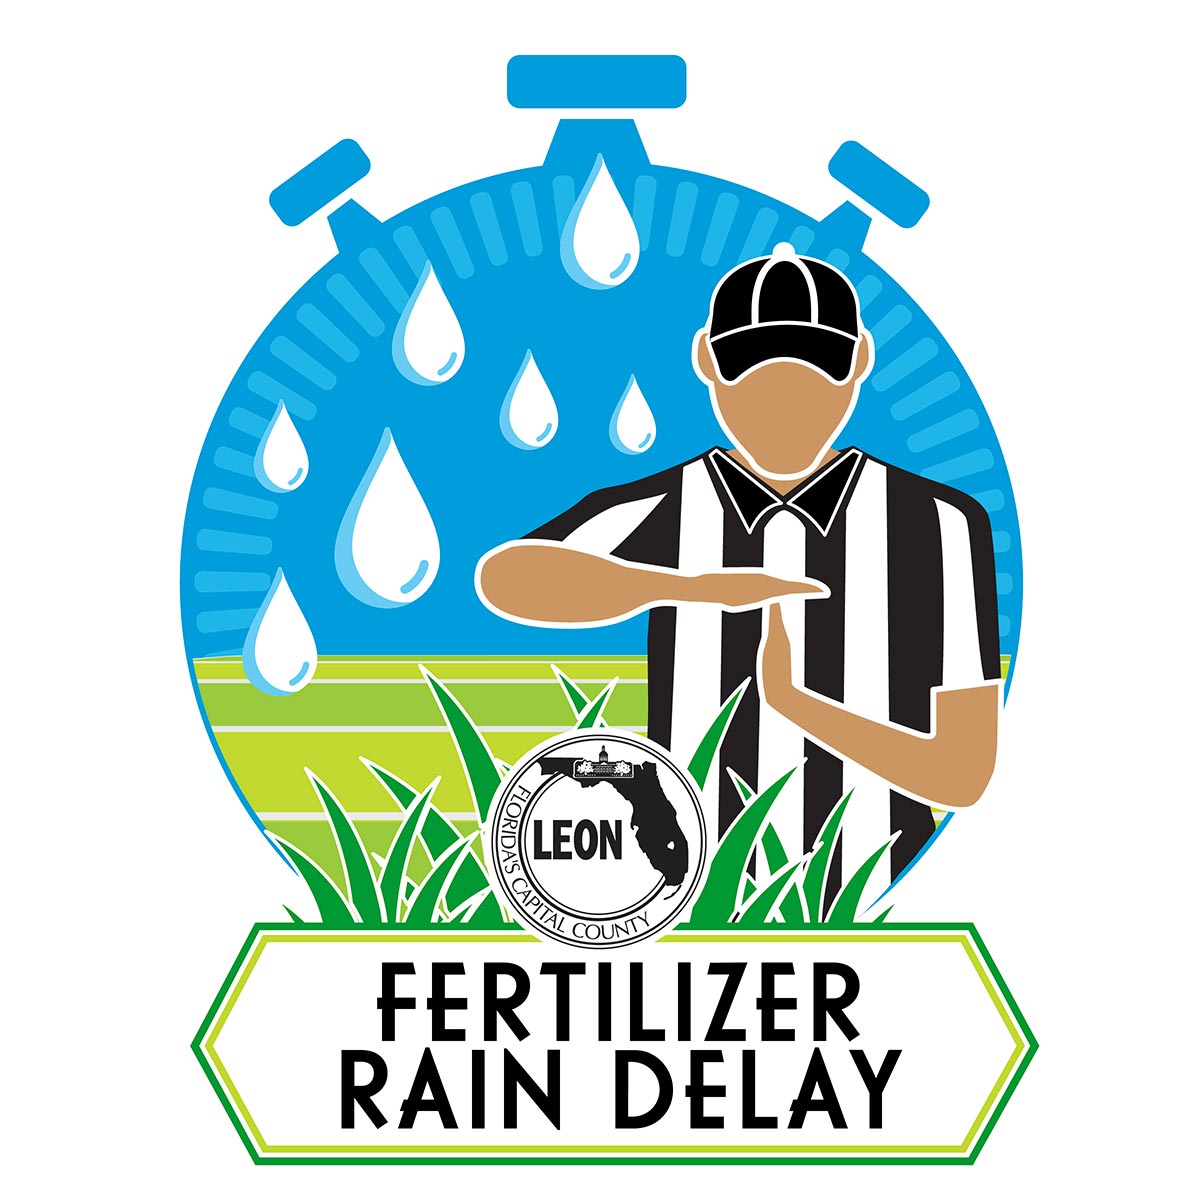 Fertilizer Rain Delay Logo — blue stopwatch shape with raindrops and a referee calling a timeout